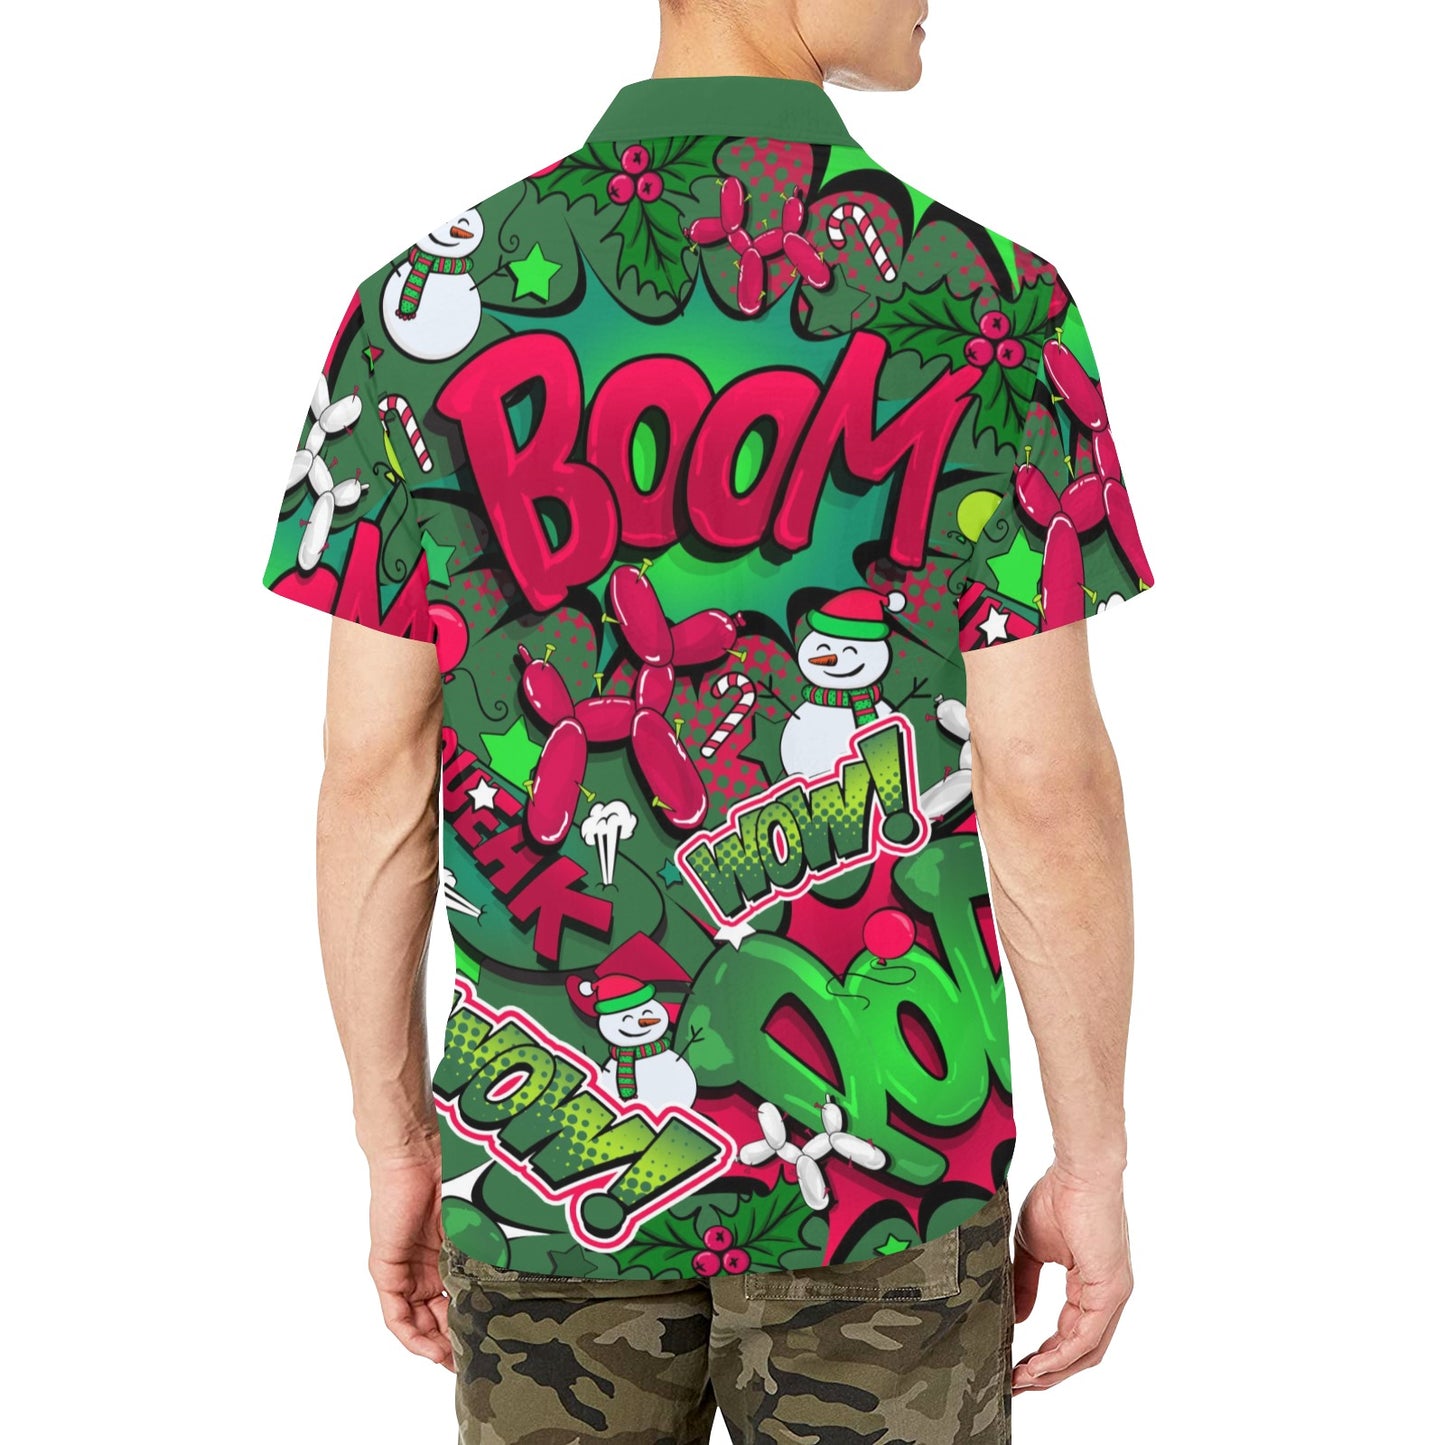 Balloon Twister shirt with pocket Green and red Christmas Theme design